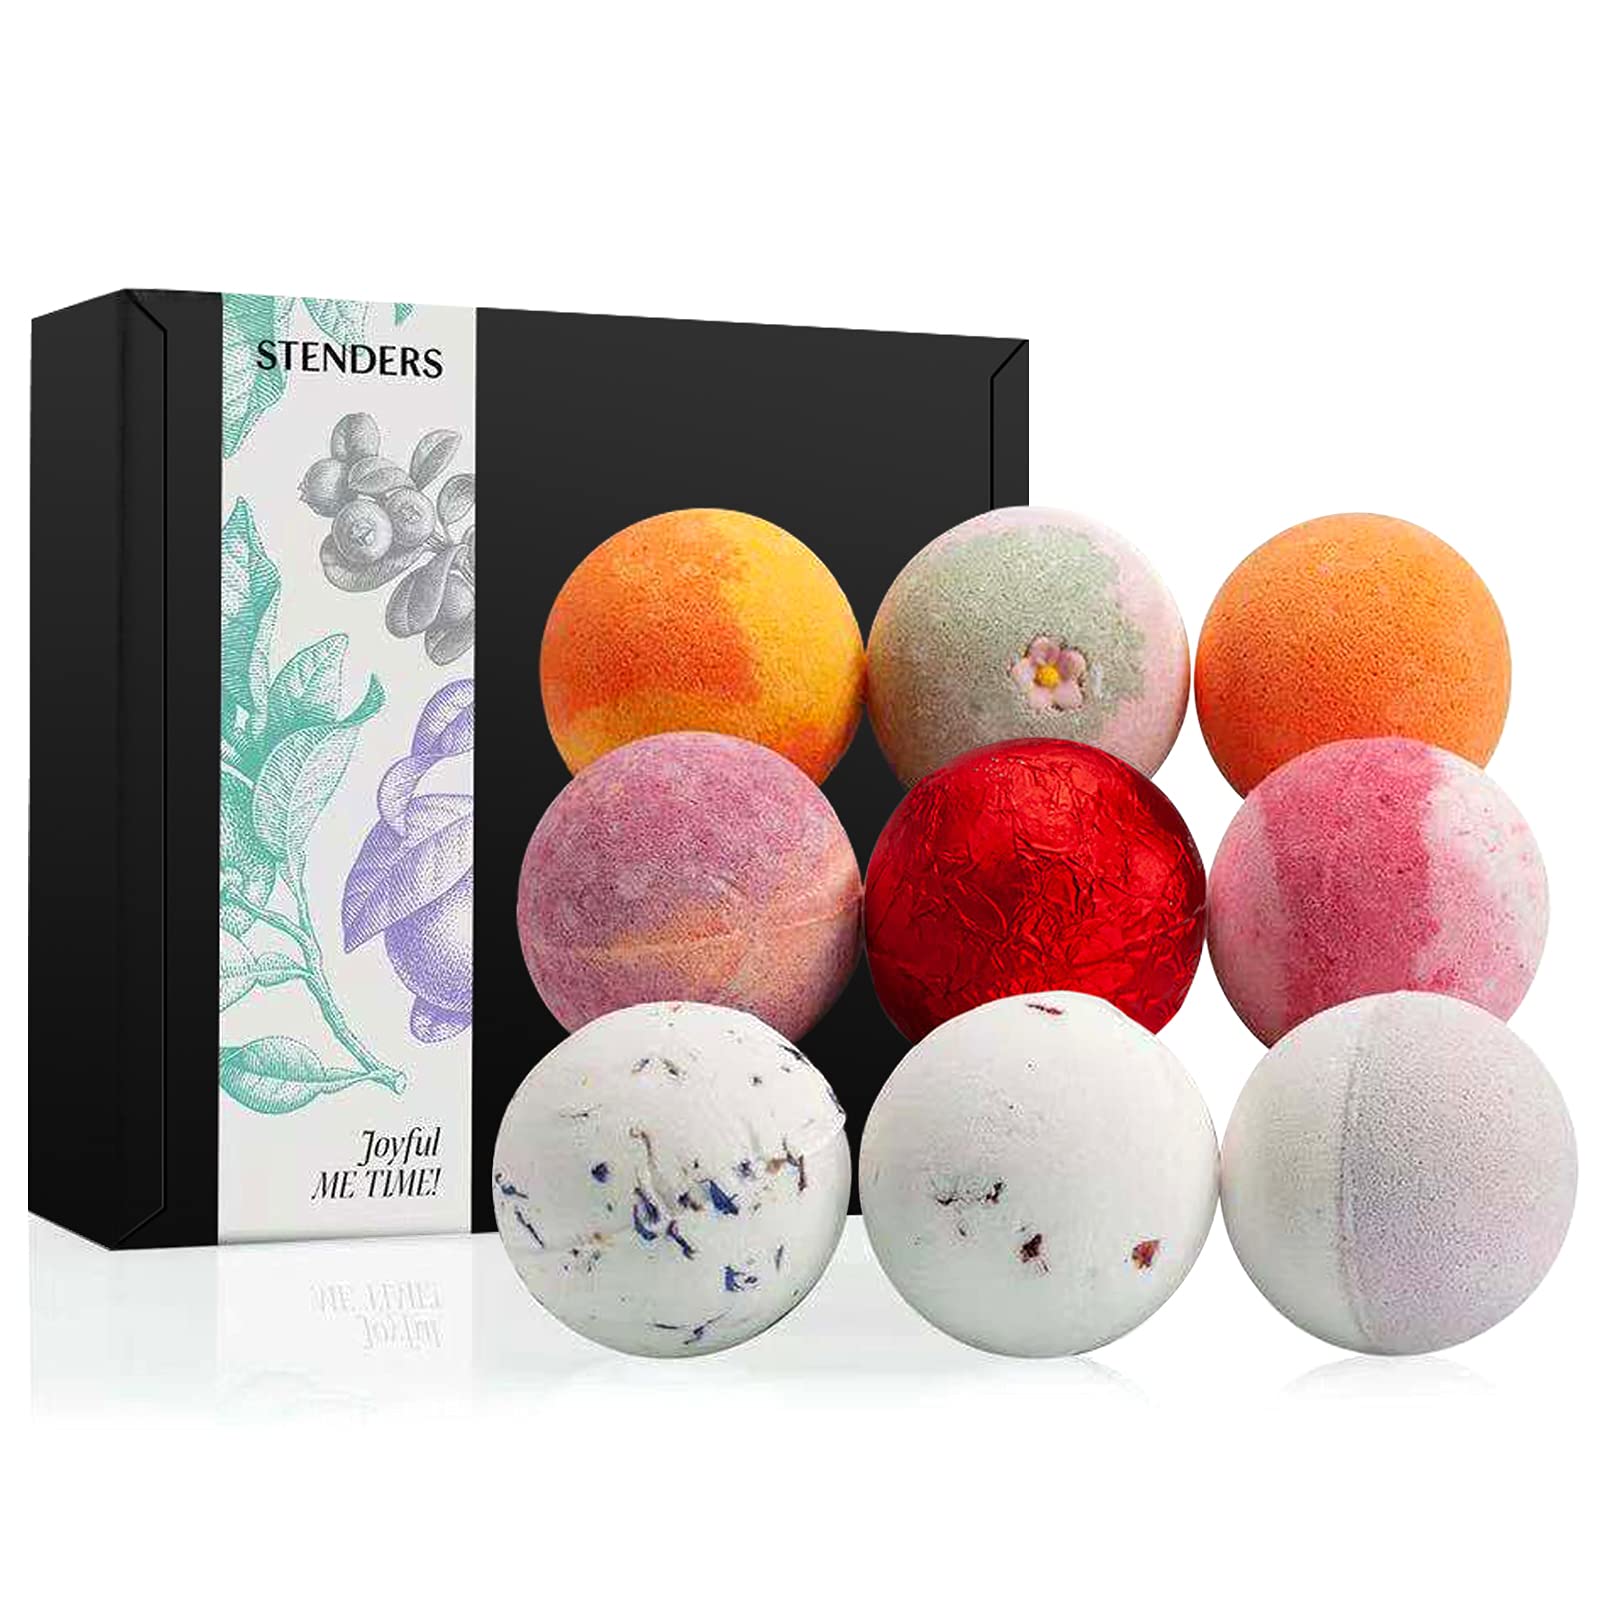 STENDERS Bath Bombs Gift Set for Women Girls- 9 Organic Super Fizzy Bath Bomb Kit - Large Bathbombs with Natural Essential Oils Perfect for Bubble & Spa Bath, Christmas Valentine's Day Gift Idea